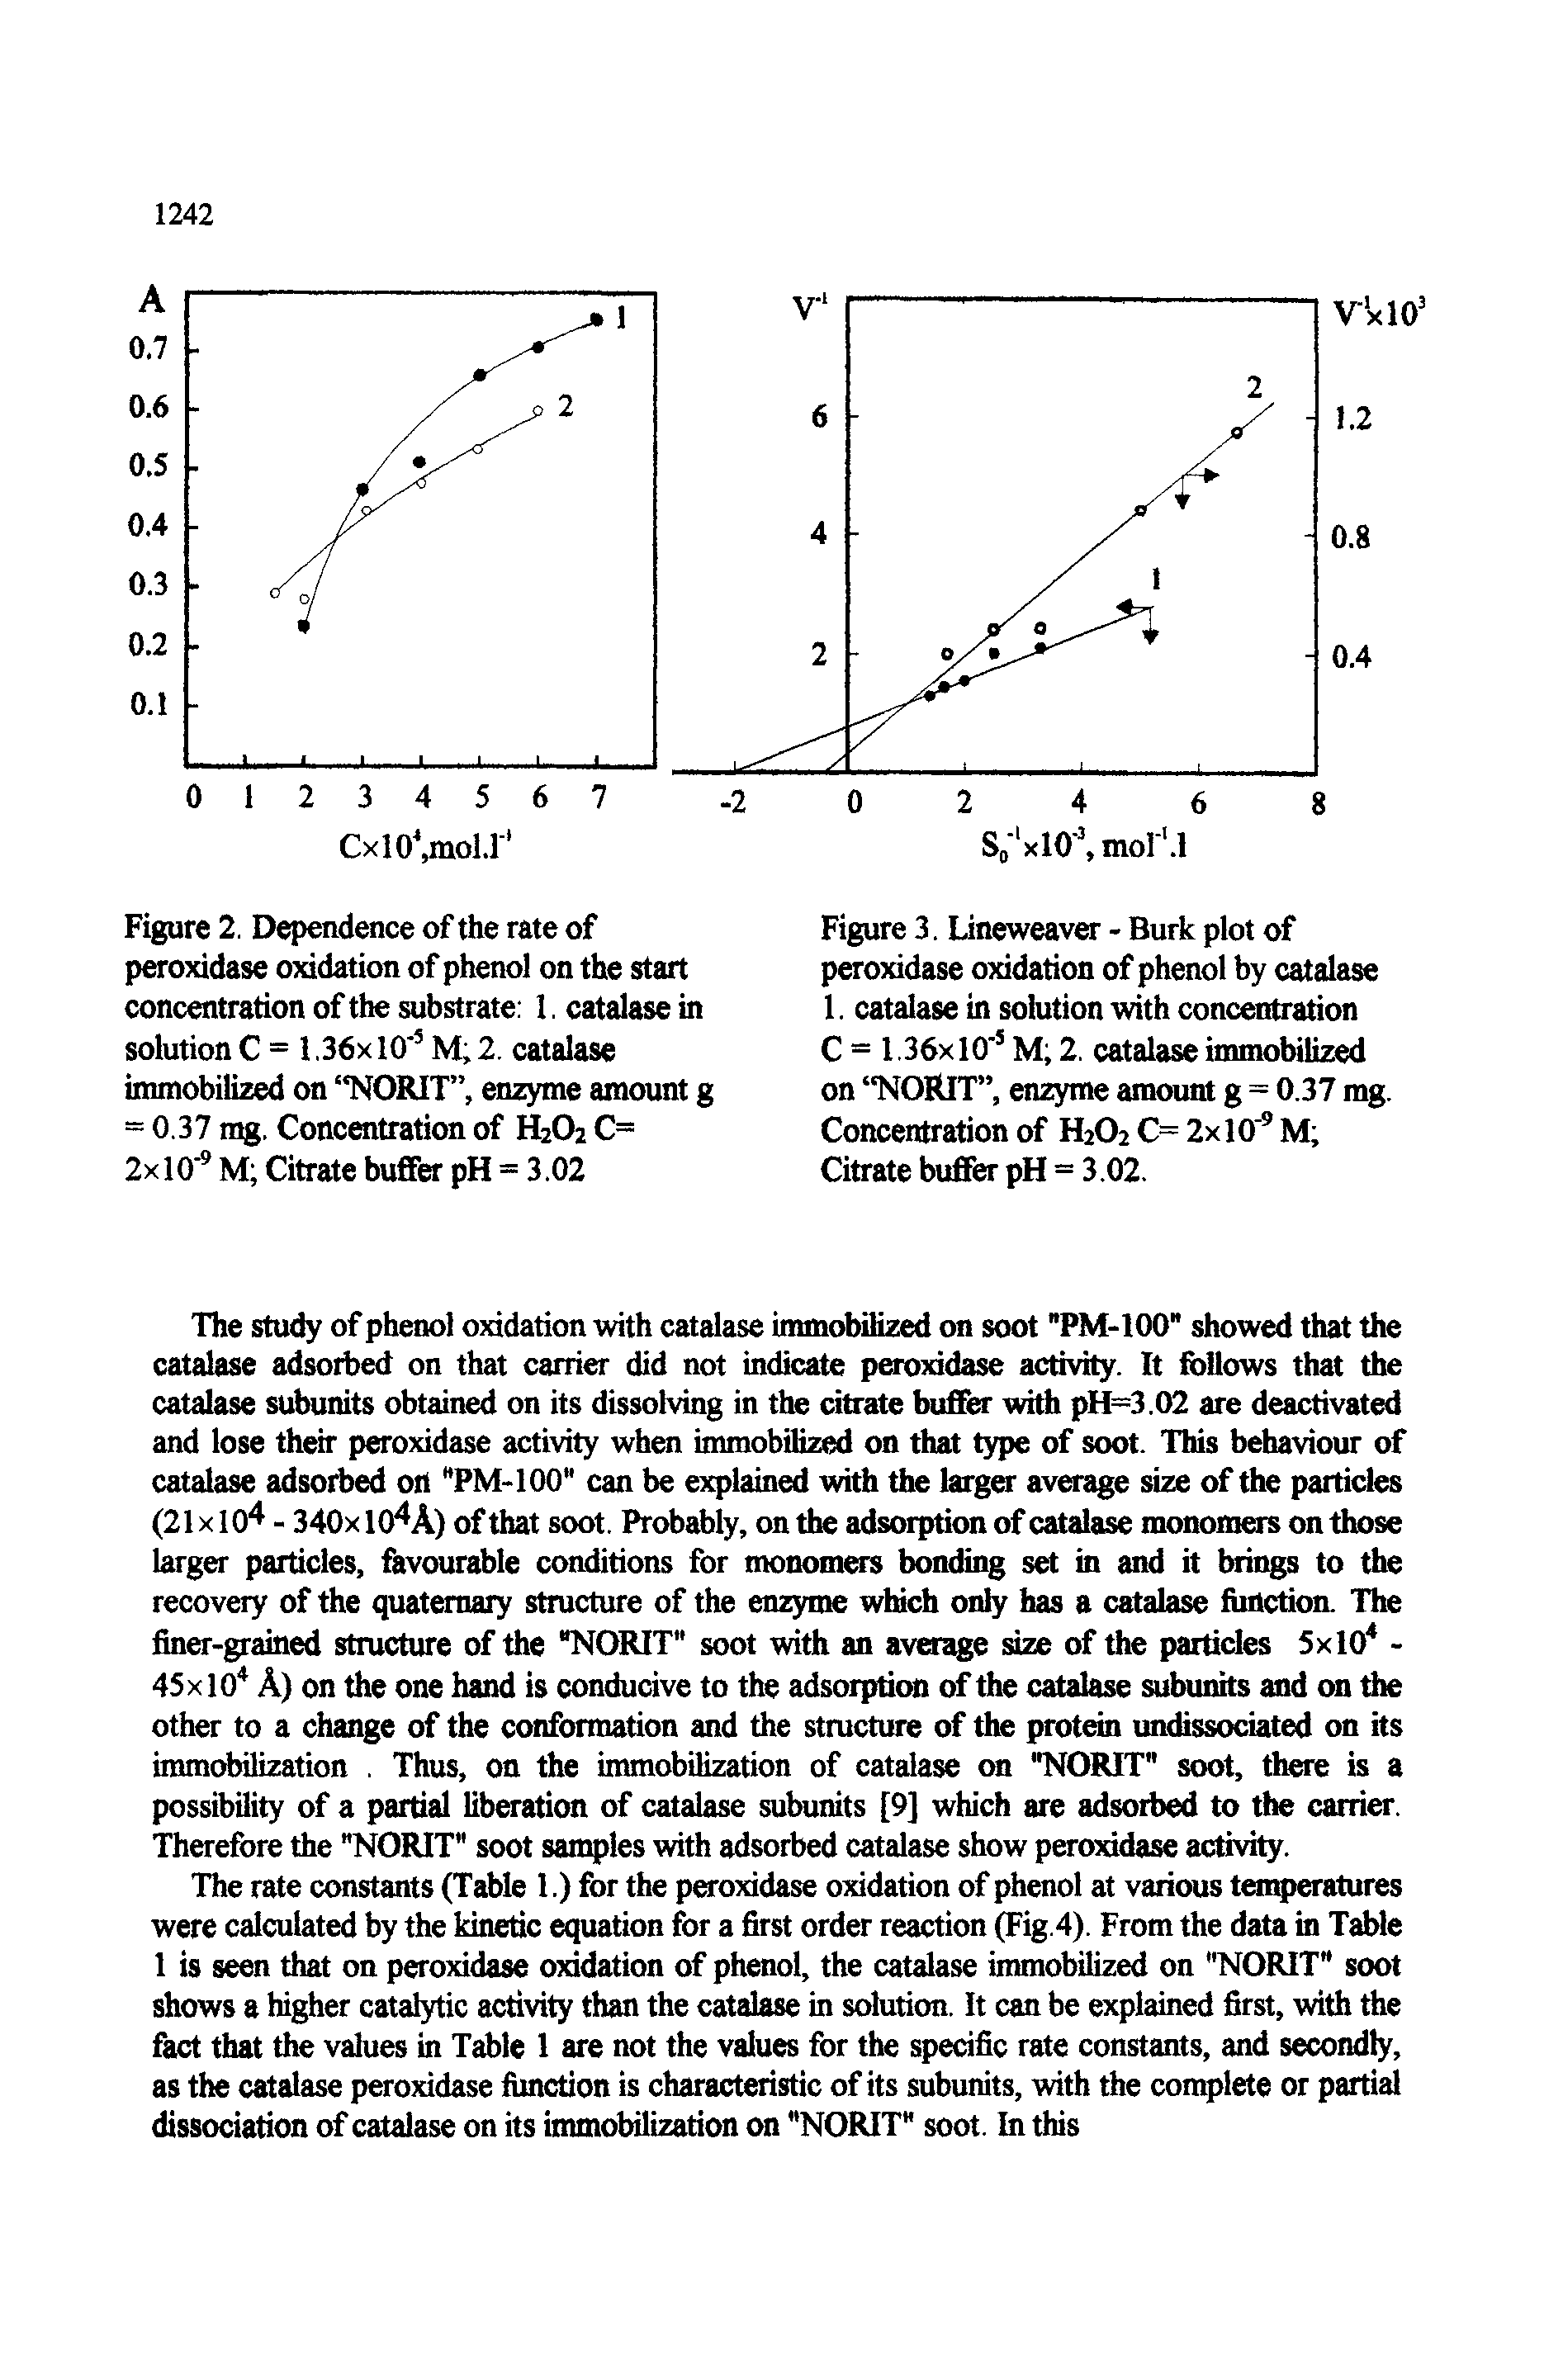 Figure 2. Dependence of the rate of peroxidase oxidation of phenol on the start concentration of the substrate 1. catalase in solution C = 1,36x 10" M 2. catalase inunobilized on NORIT , enzyme amount g = 0,37 mg. Concentration of H2O2 C= 2x10 M Citrate buffer pH = 3.02...